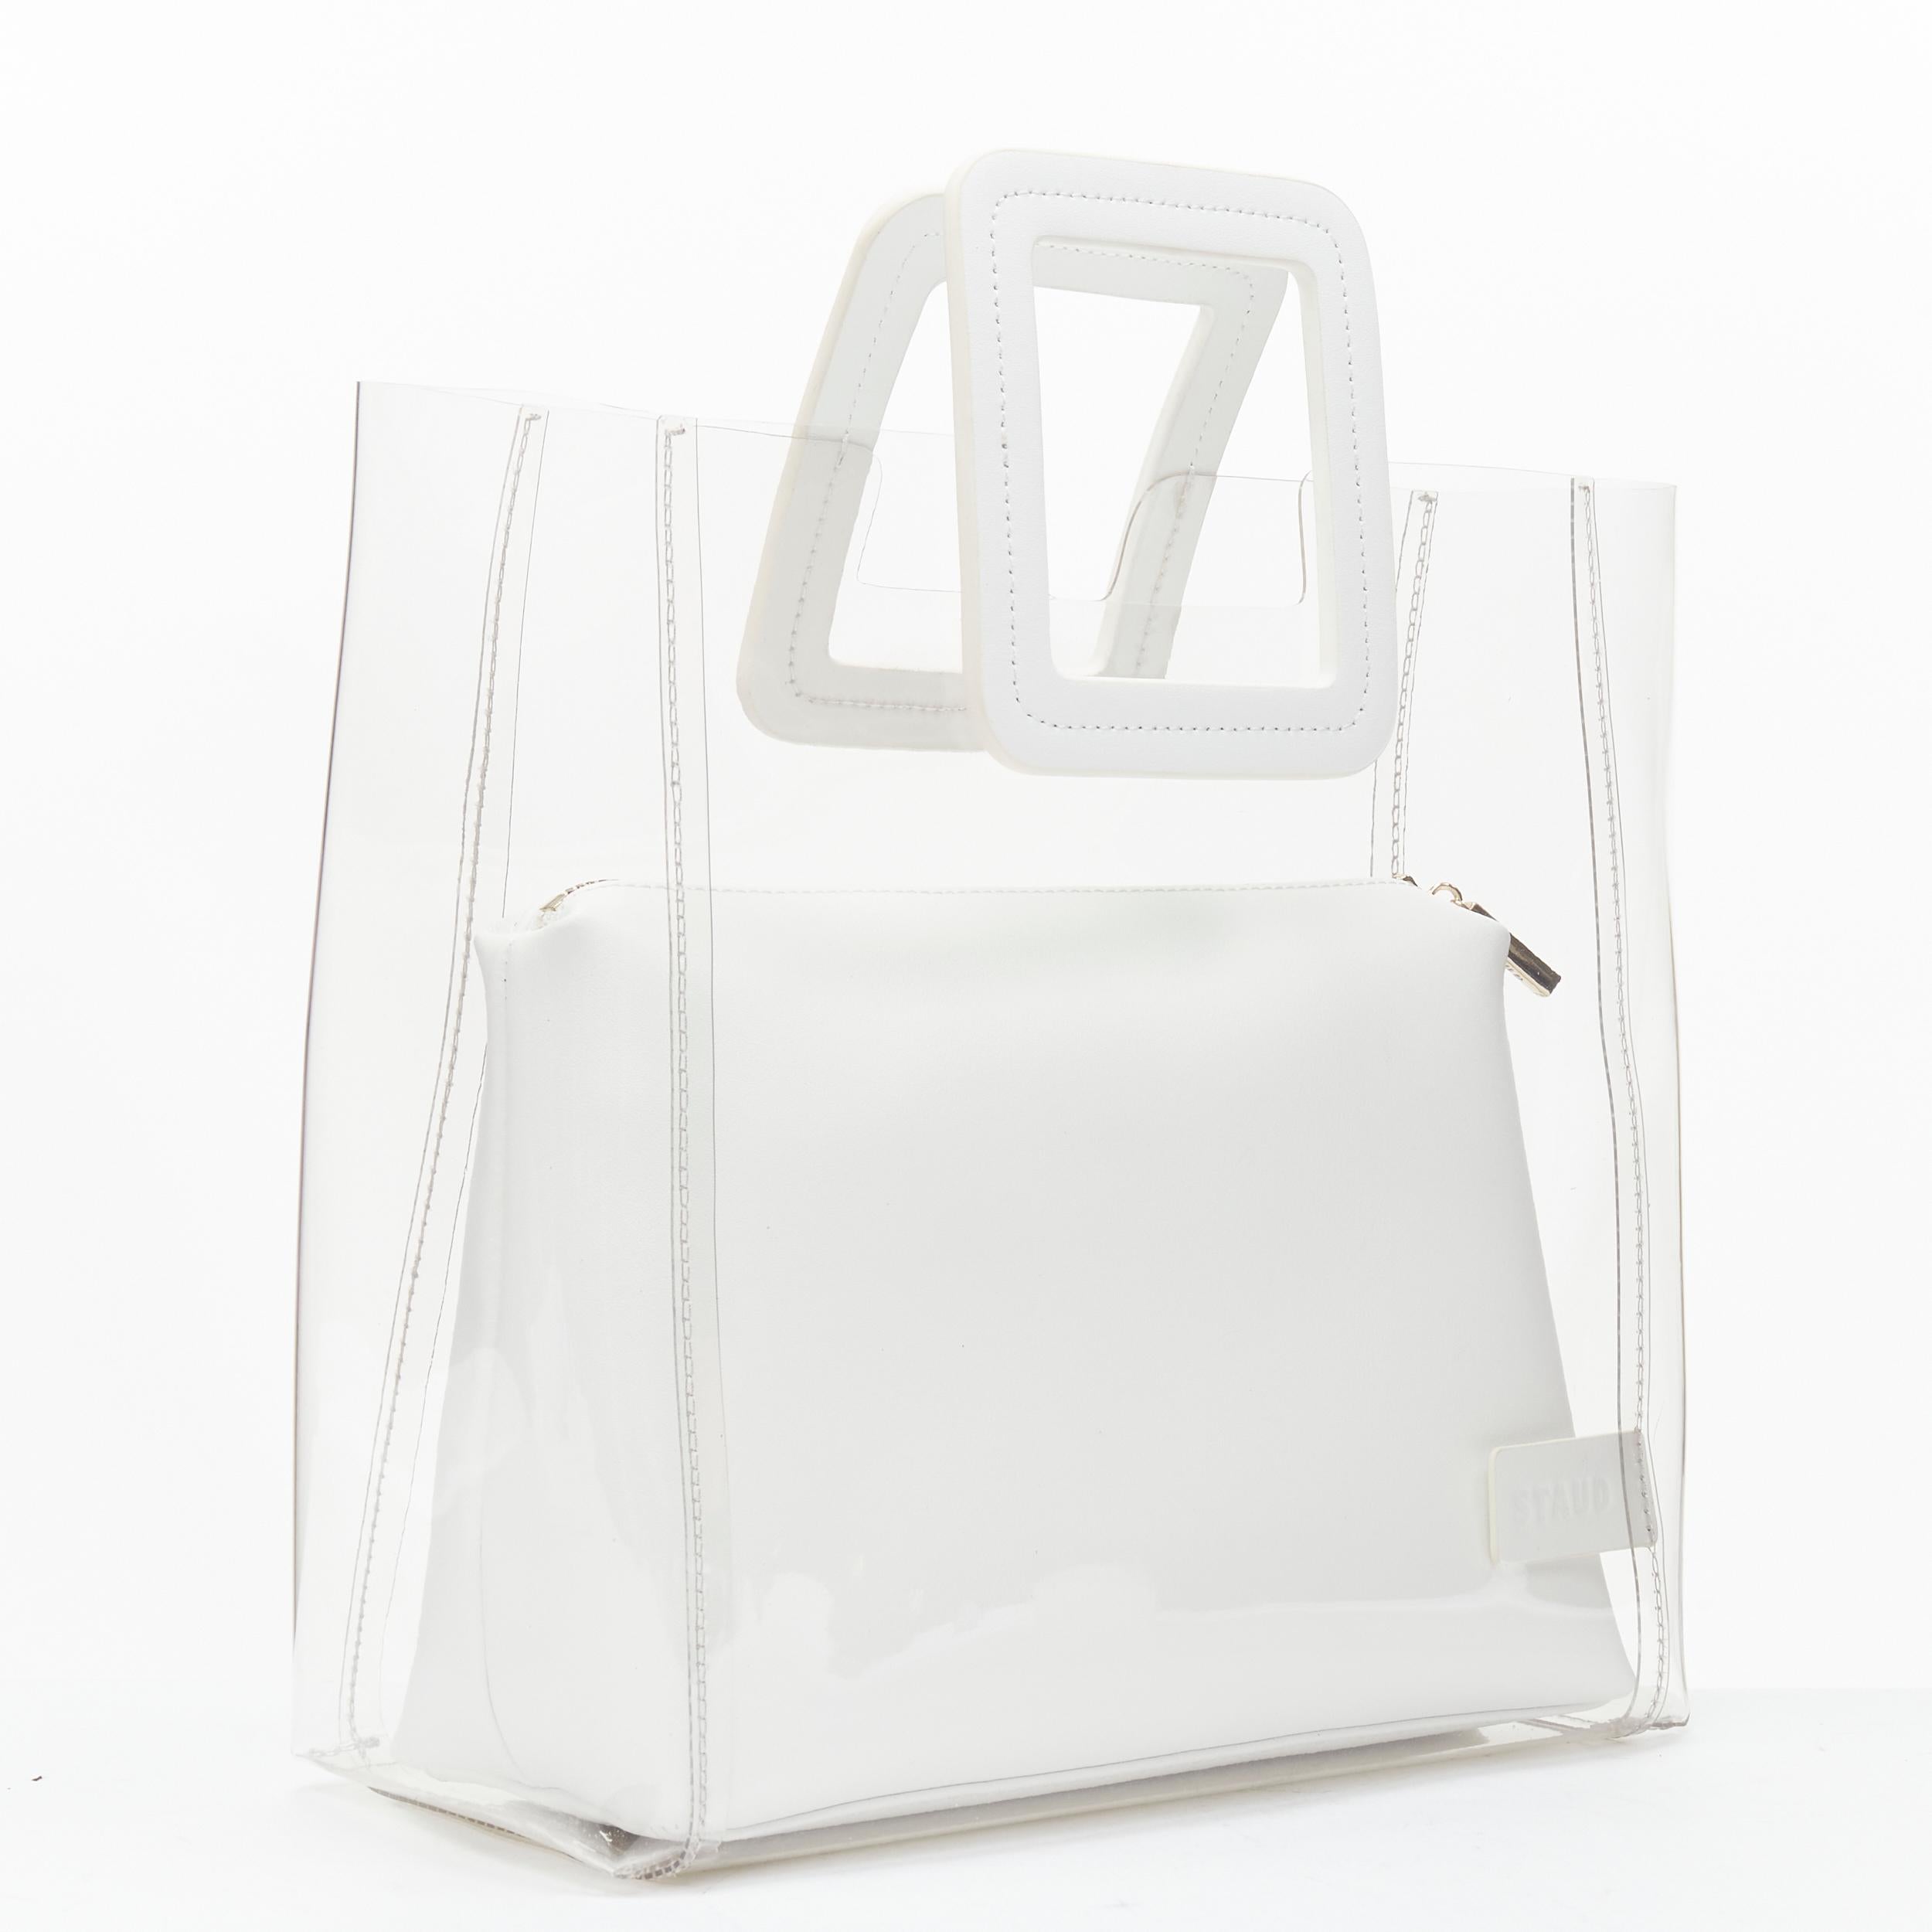 new STAUD Shirley clear PVC white leather square handle pouch clutch tote bag 
Reference: TACW/A00027 
Brand: Staud 
Model: Shirley 
Material: PVC 
Color: White
Pattern: Solid 
Extra Detail: Leather zip pouch 2-in-1 clear PVC tote bag. 
Estimated